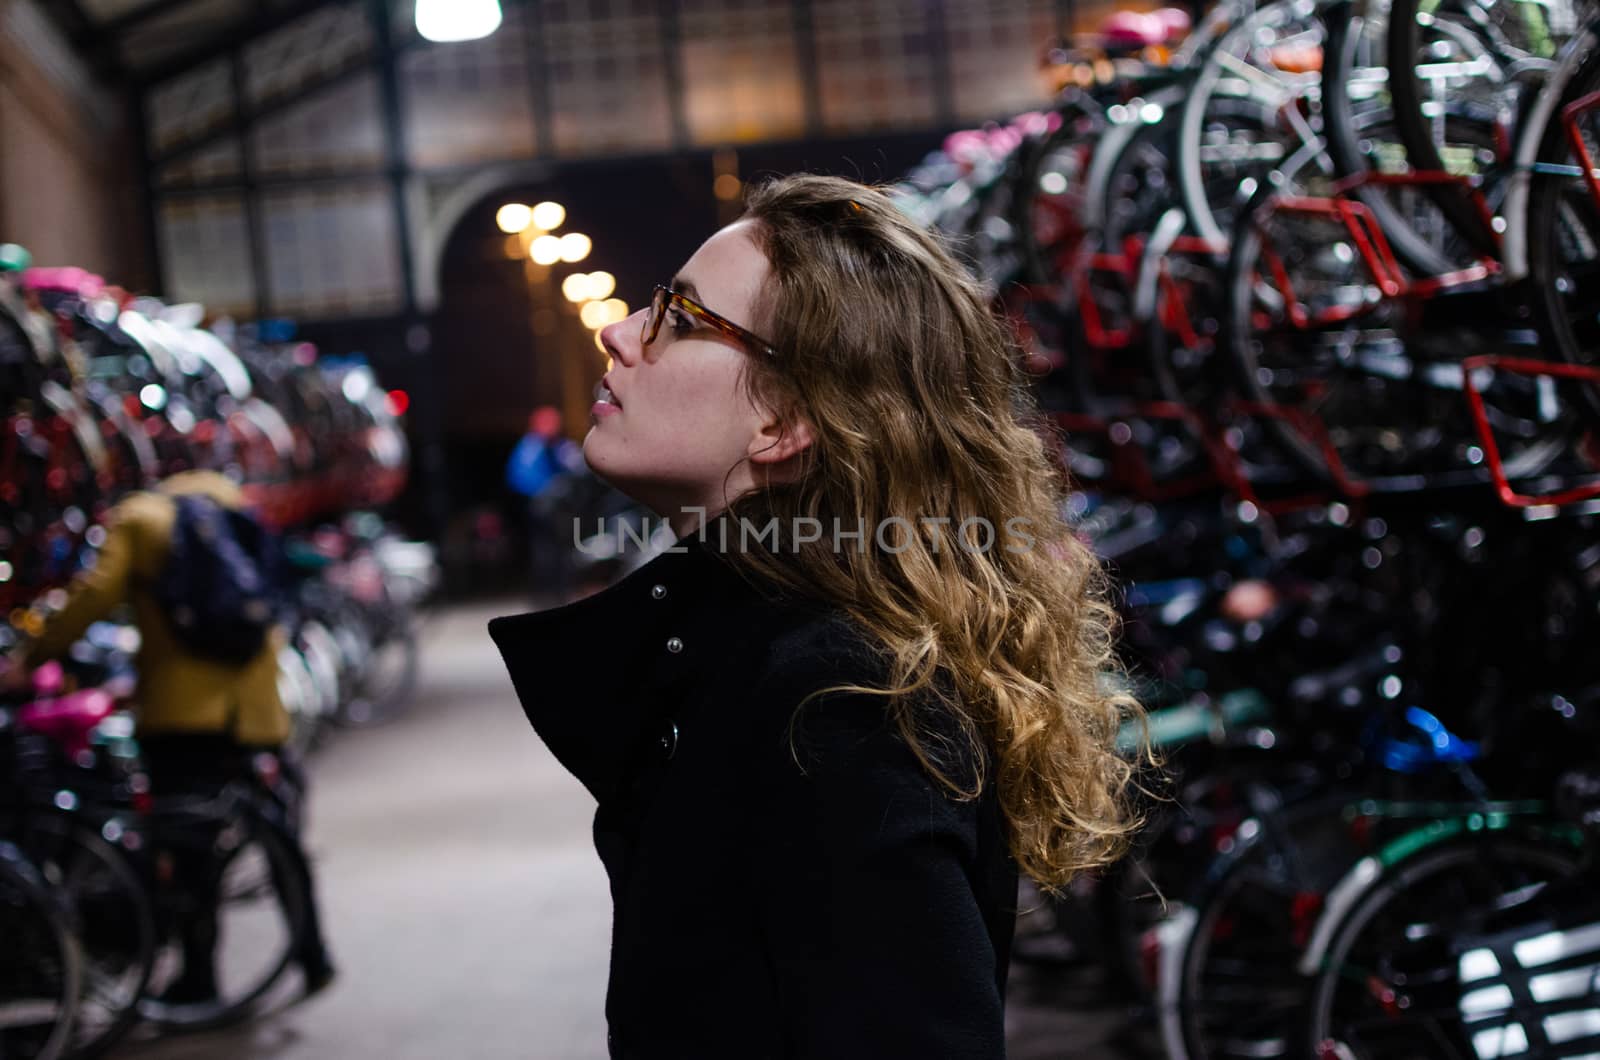 Photograph of a Spanish blonde girl dressed in black walking through the winter streets of a Dutch town in a bicycle parking lot.